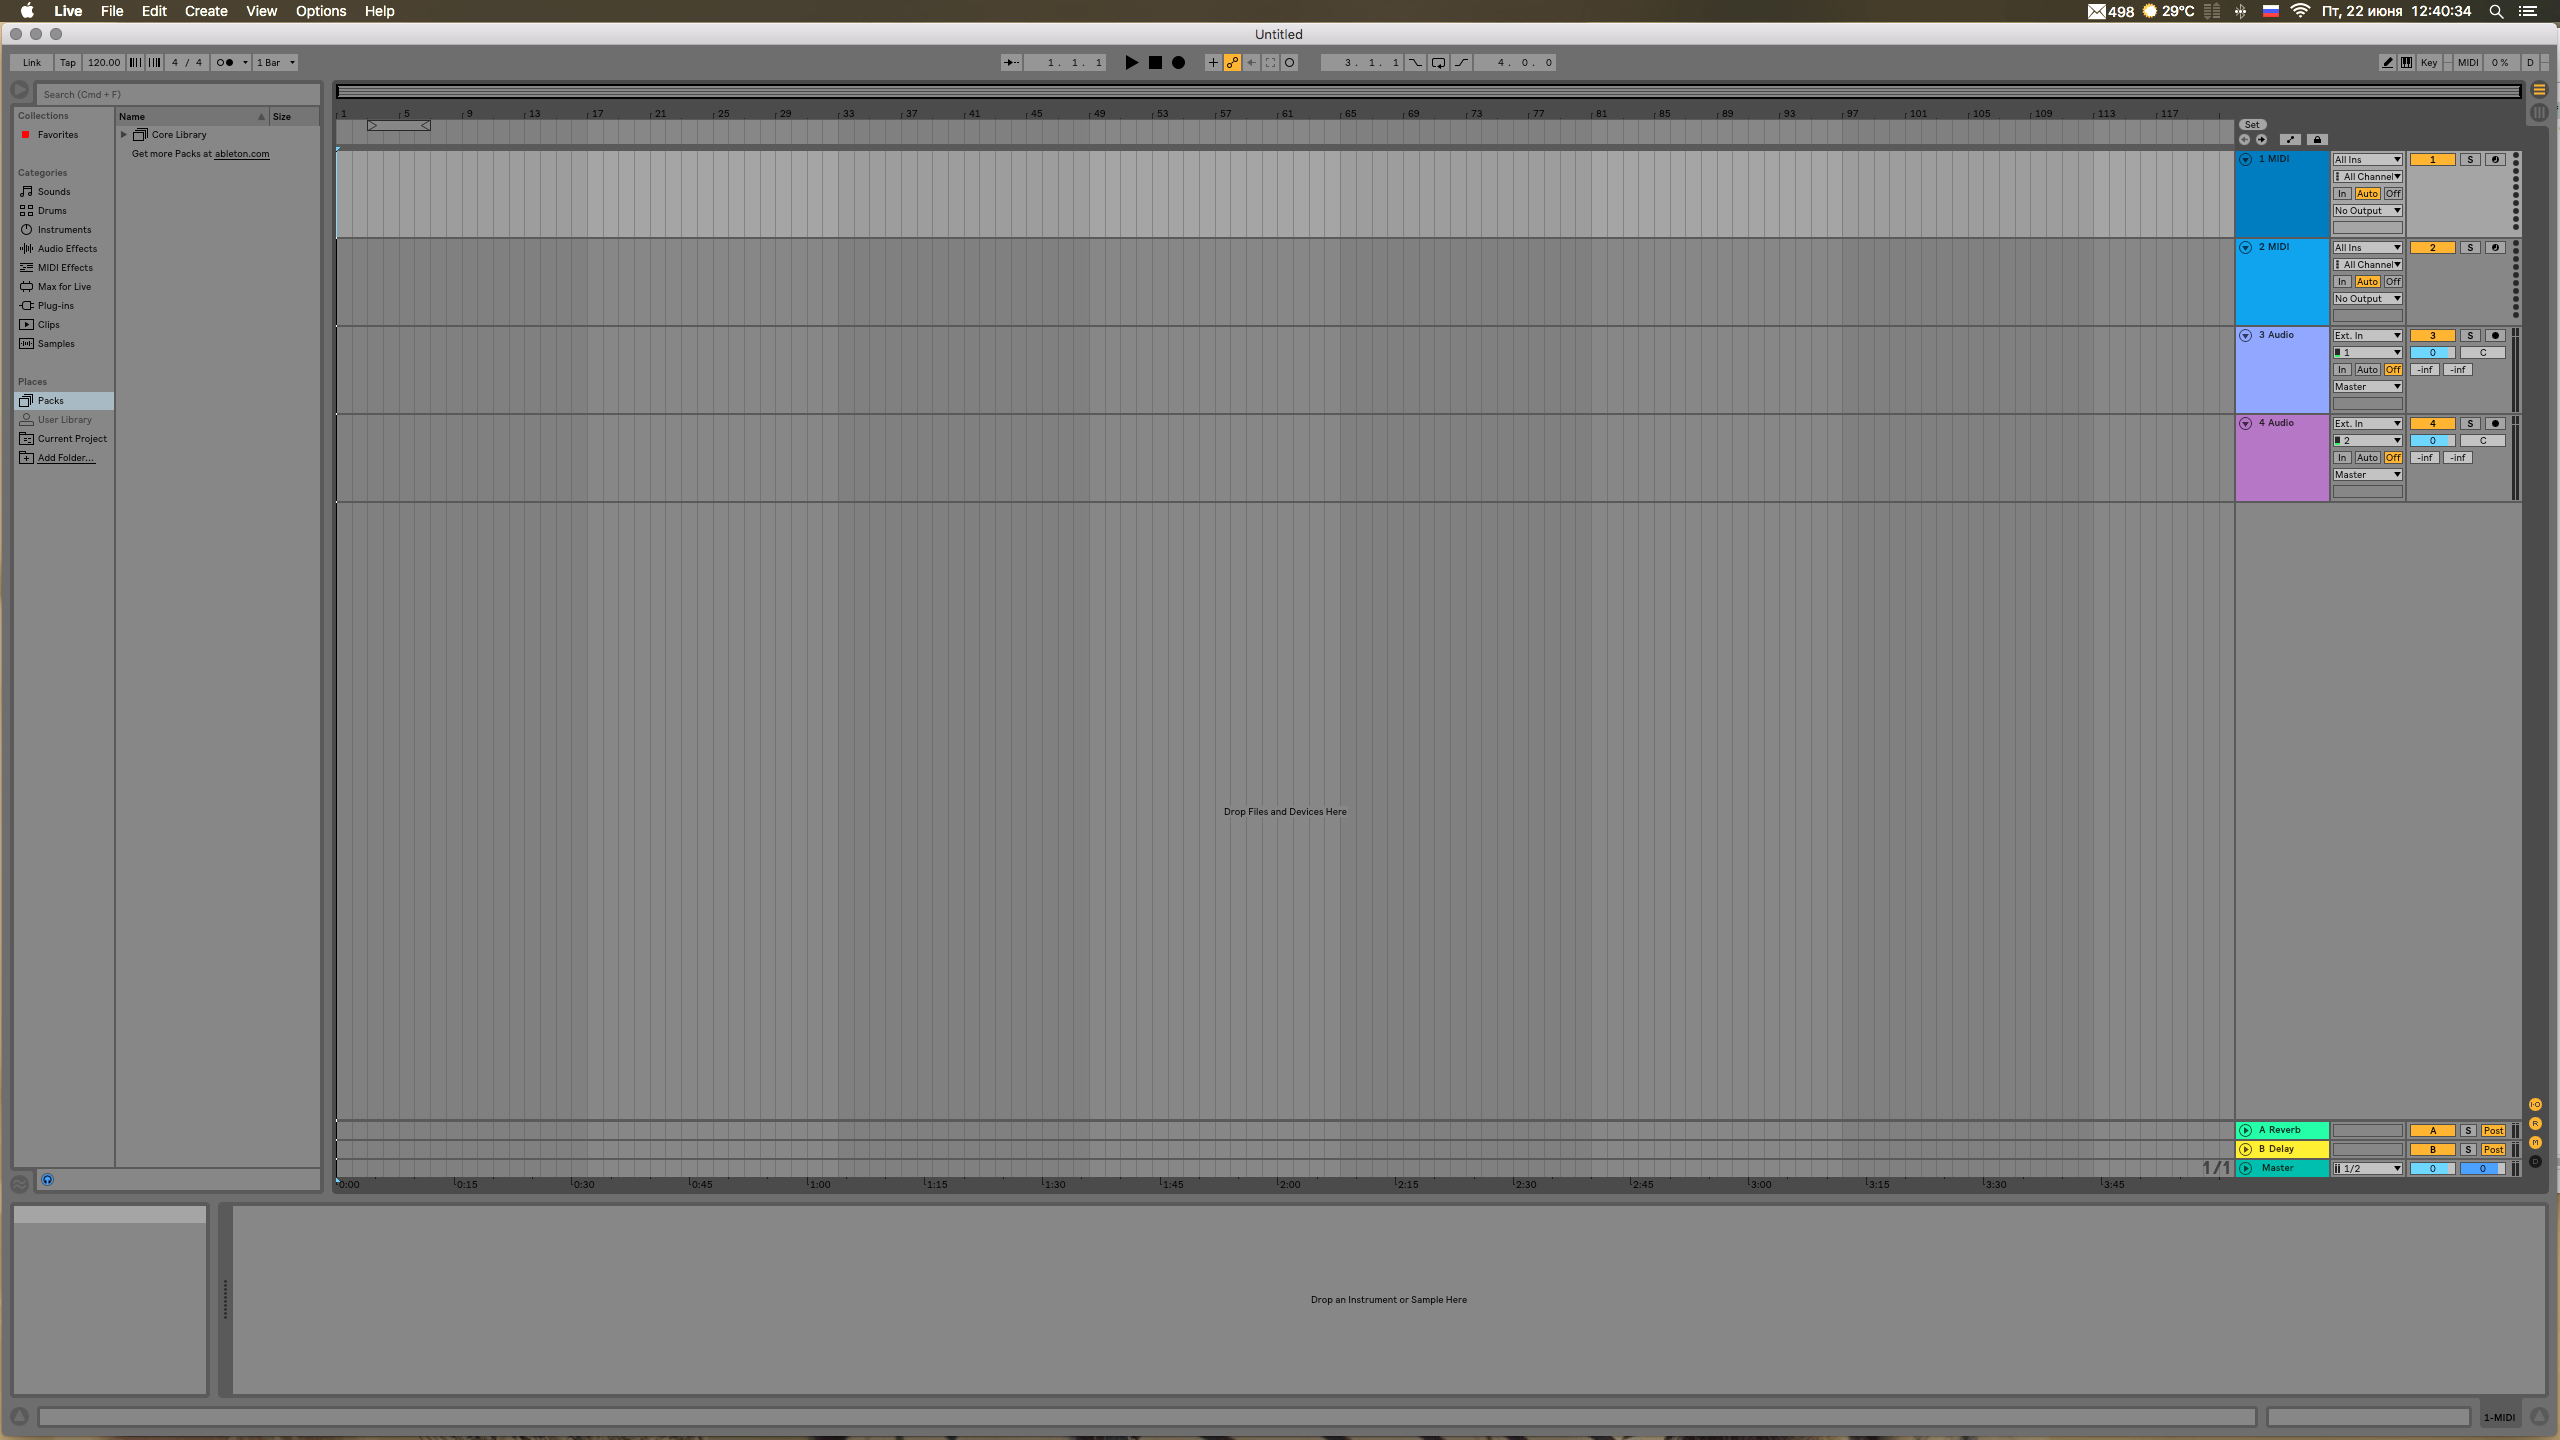 ableton live torrent version is not working with new update on mac